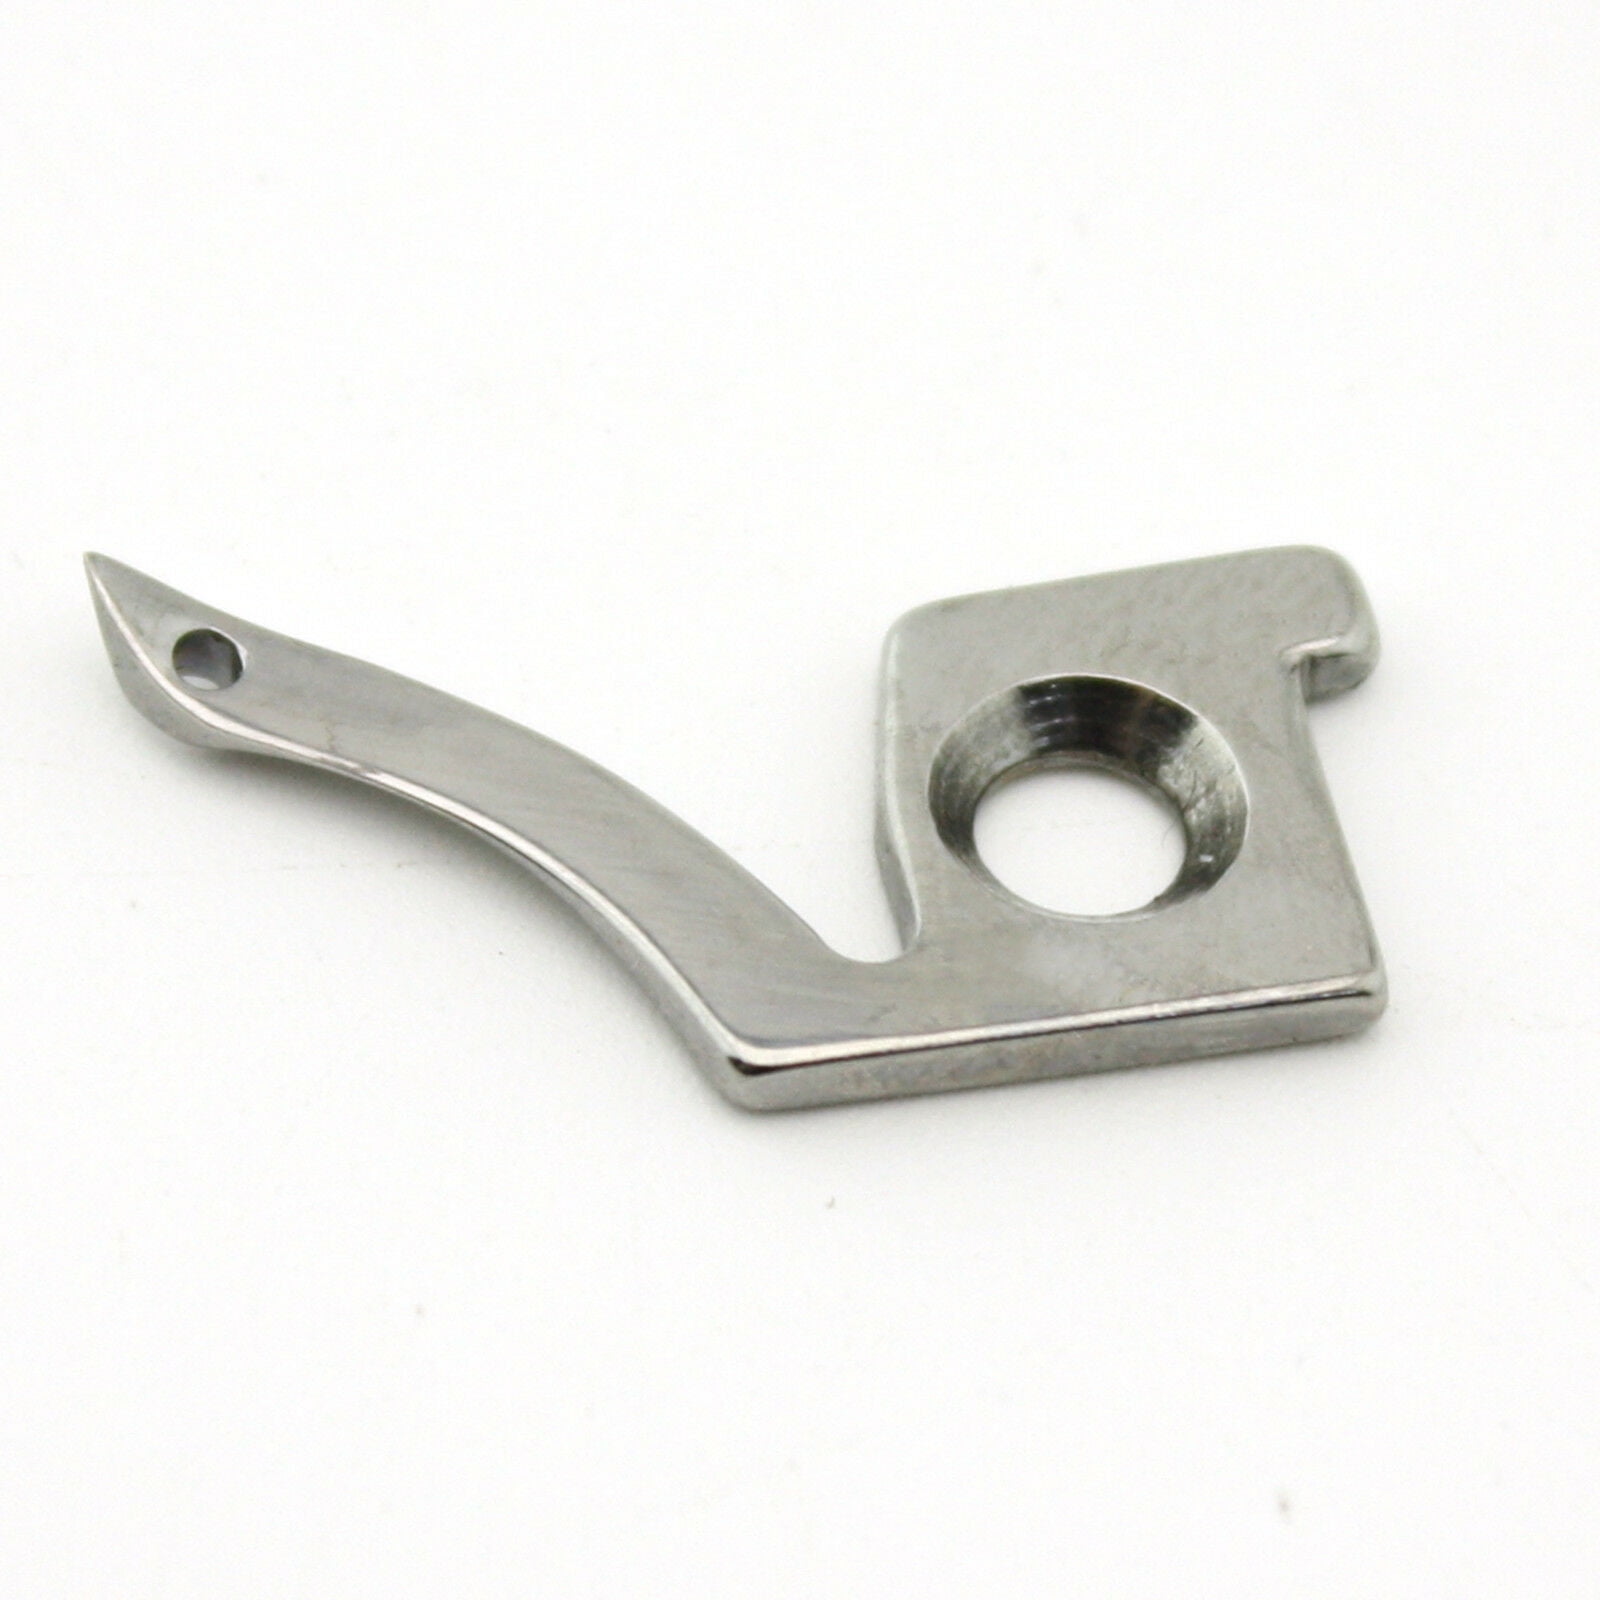 CKPSMS Brand #X77774001 1PCS Lower Looper Compatible with Brother 925D,935D,929D,1034D SERGER 